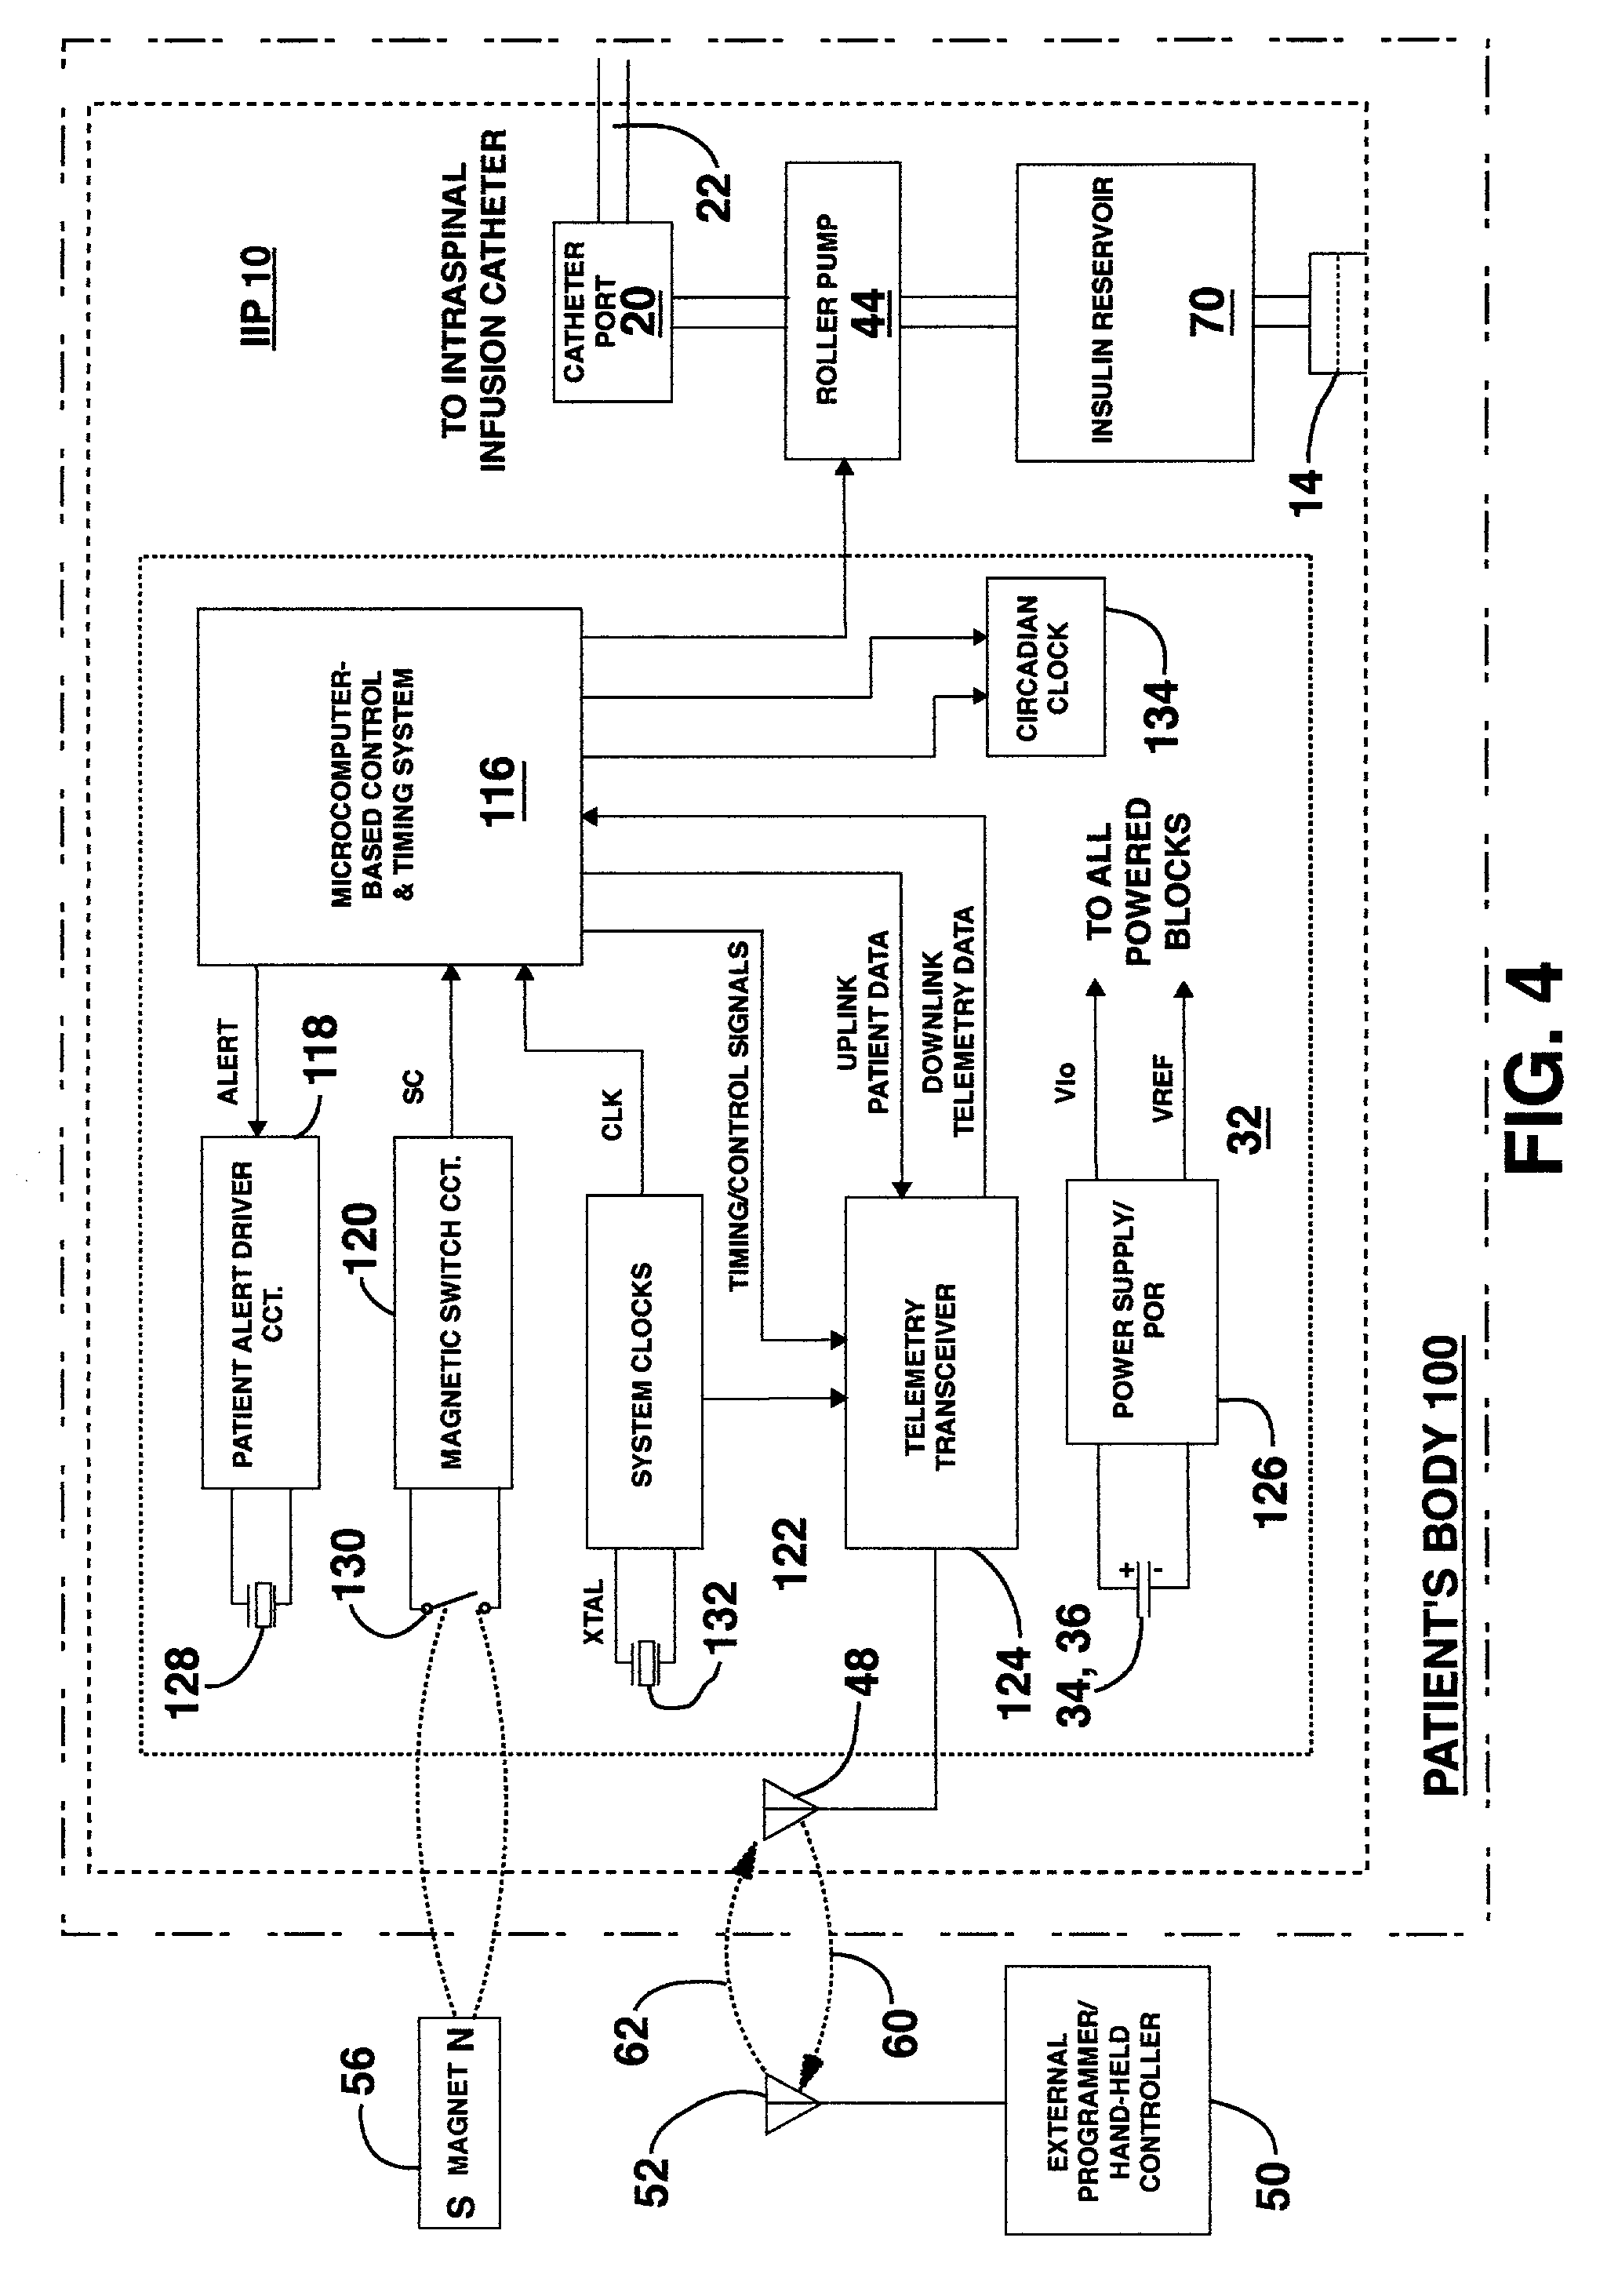 Methods and apparatus for delivering a drug influencing appetite for treatment of eating disorders